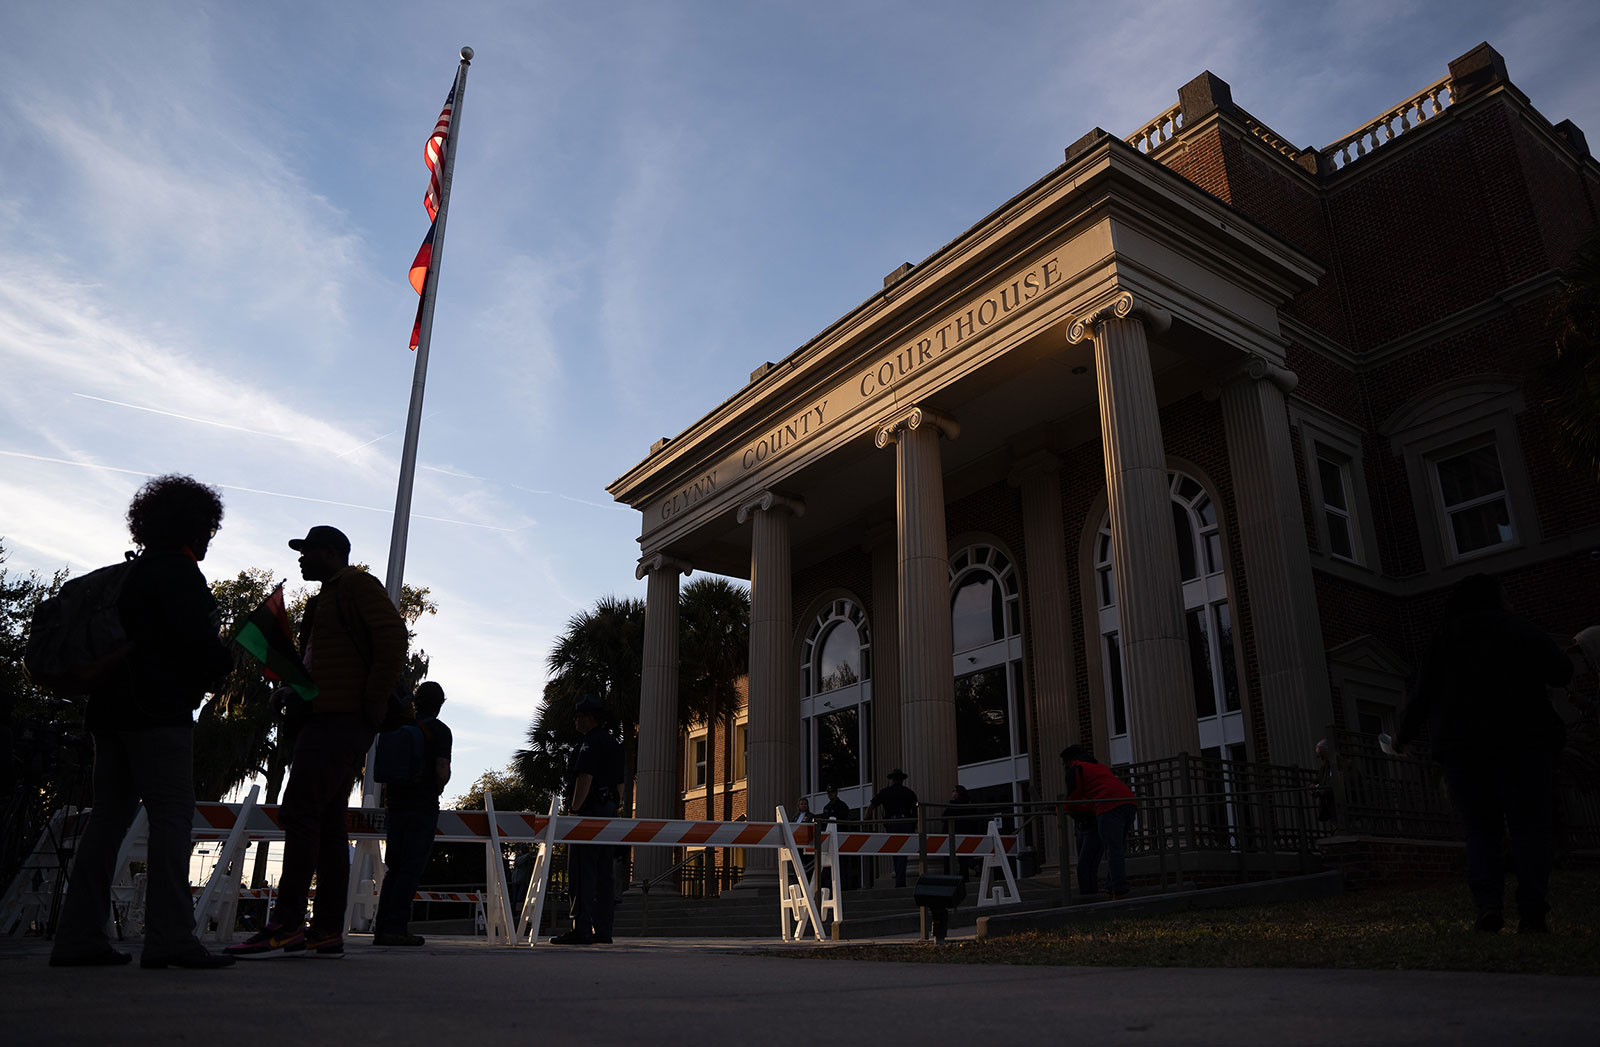 People stand outside the Gylnn County Courthouse on November 23.